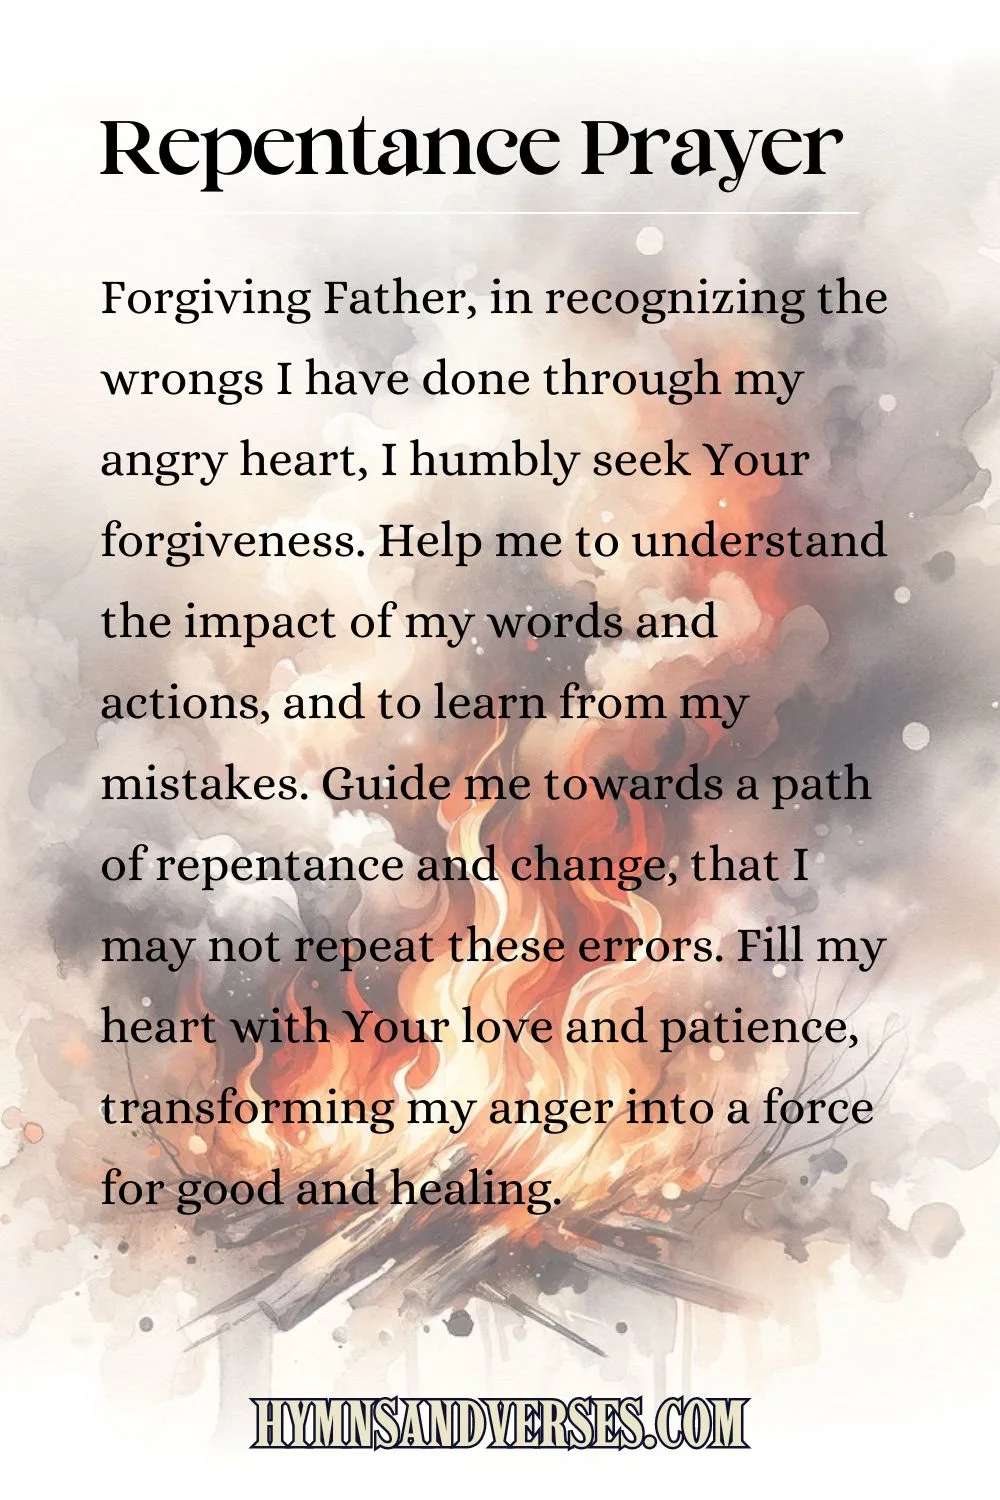 Pin image for prayer, reads: Forgiving Father, in recognizing the wrongs I have done through my angry heart, I humbly seek Your forgiveness. Help me to understand the impact of my words and actions, and to learn from my mistakes. Guide me towards a path of repentance and change, that I may not repeat these errors. Fill my heart with Your love and patience, transforming my anger into a force for good and healing.